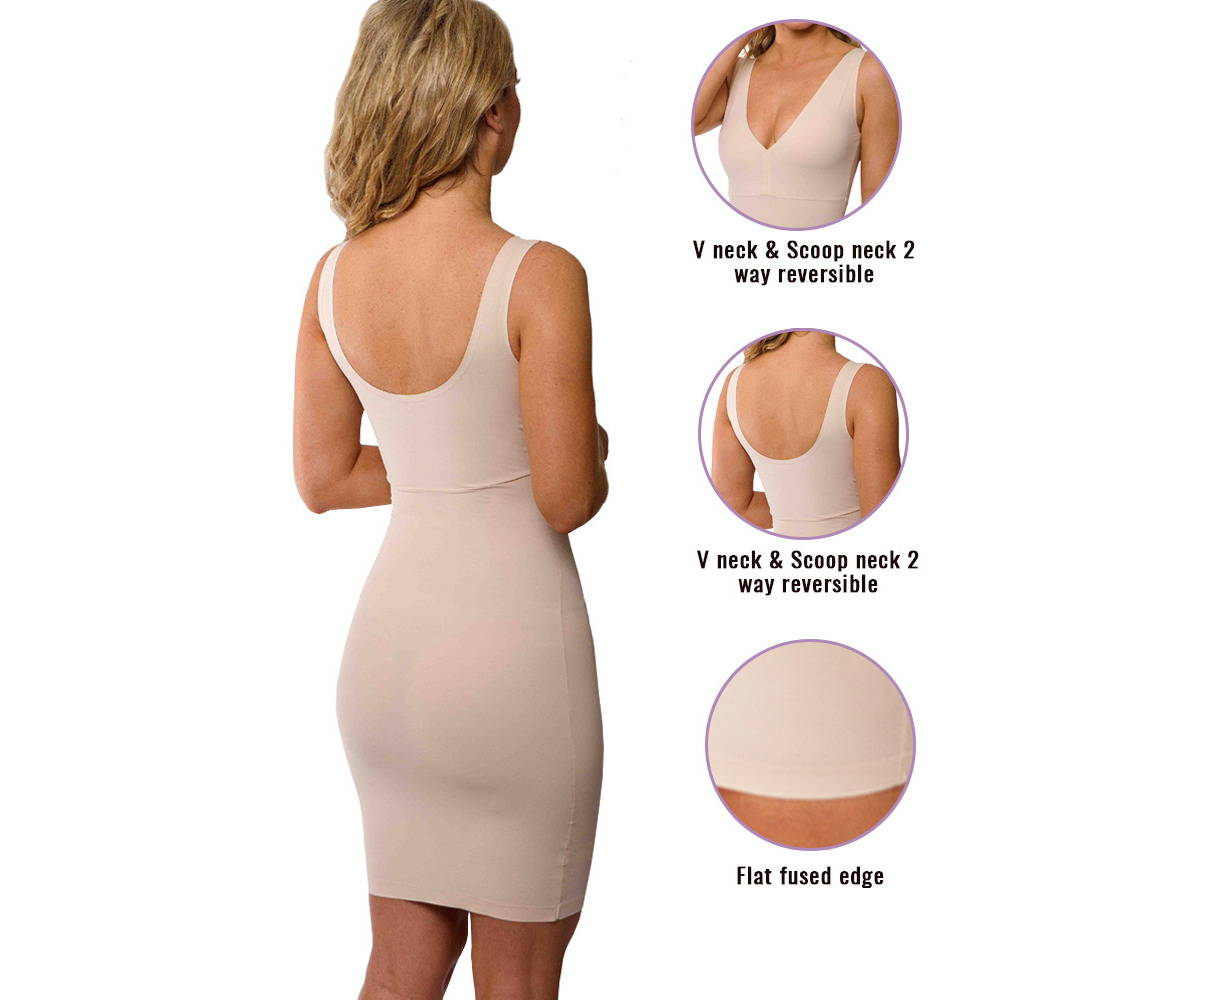 Check out the LaSculpte 2 Way Reversible Shaping Slip